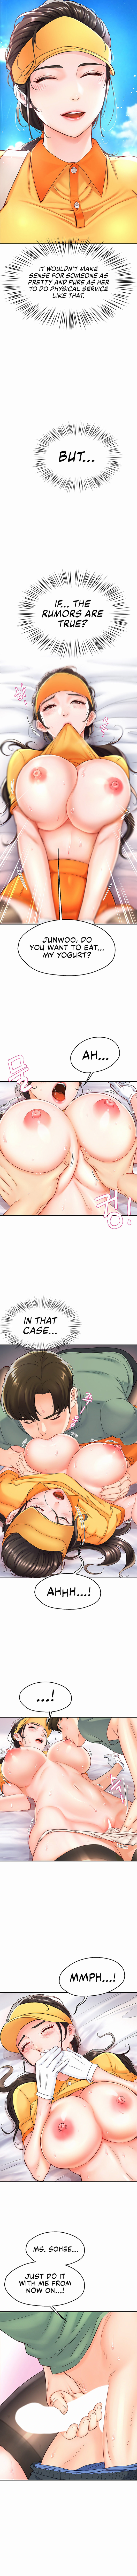 Yogurt Delivery Lady - Chapter 1 Page 10